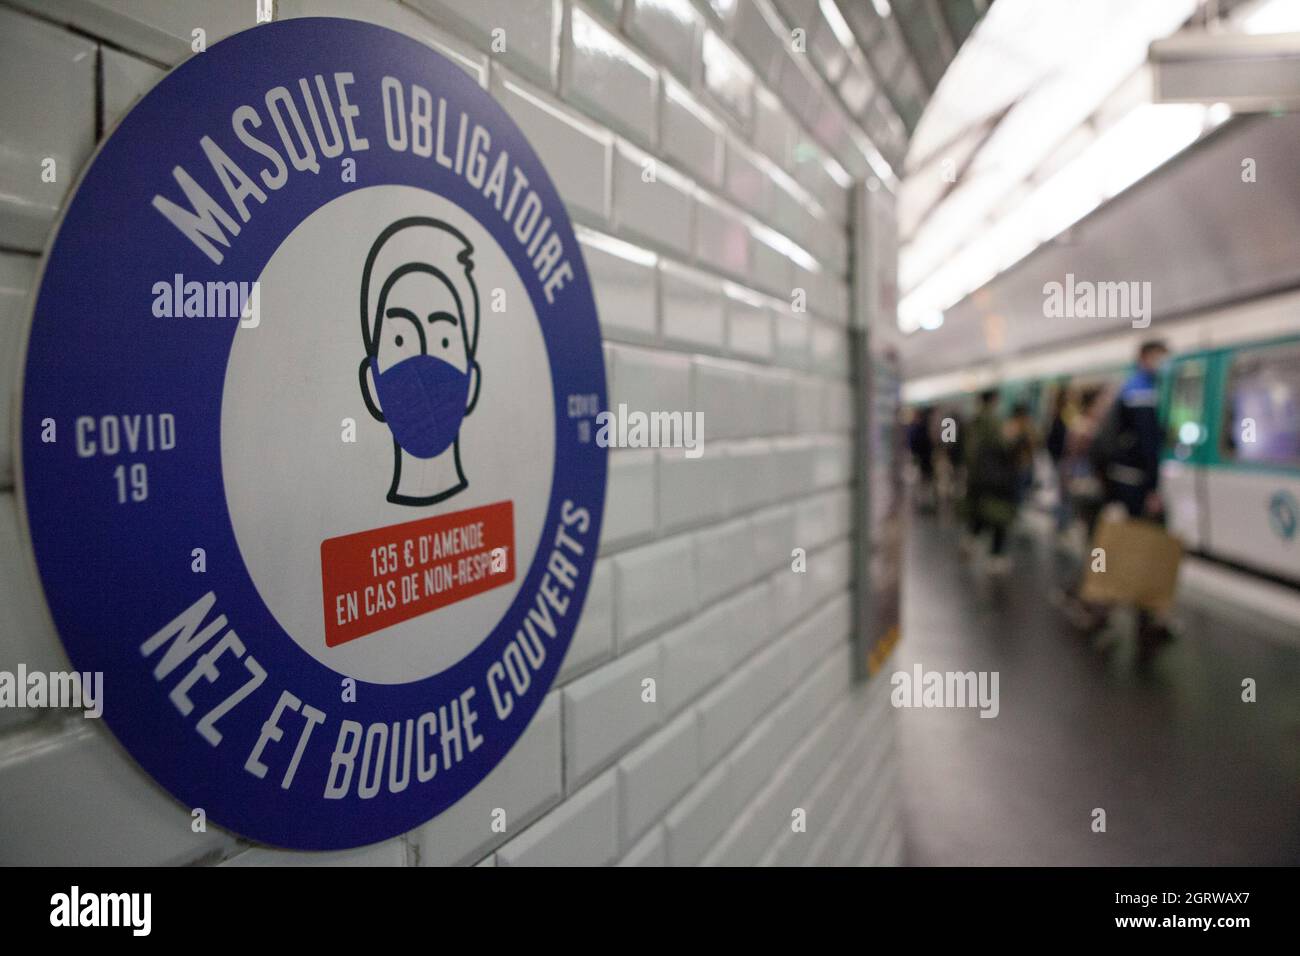 Paris, France, 1 October 2021: A notice inside a Metro station says 'Masque Obligatoire', mask obligatory over nose and mouth and warns of a 135 euro fine for non-compliance. Almost everyone wears face masks, as required, to help reduce the spread of coronavirus and the risk of covid-19. Anna Watson/Alamy Live News Stock Photo